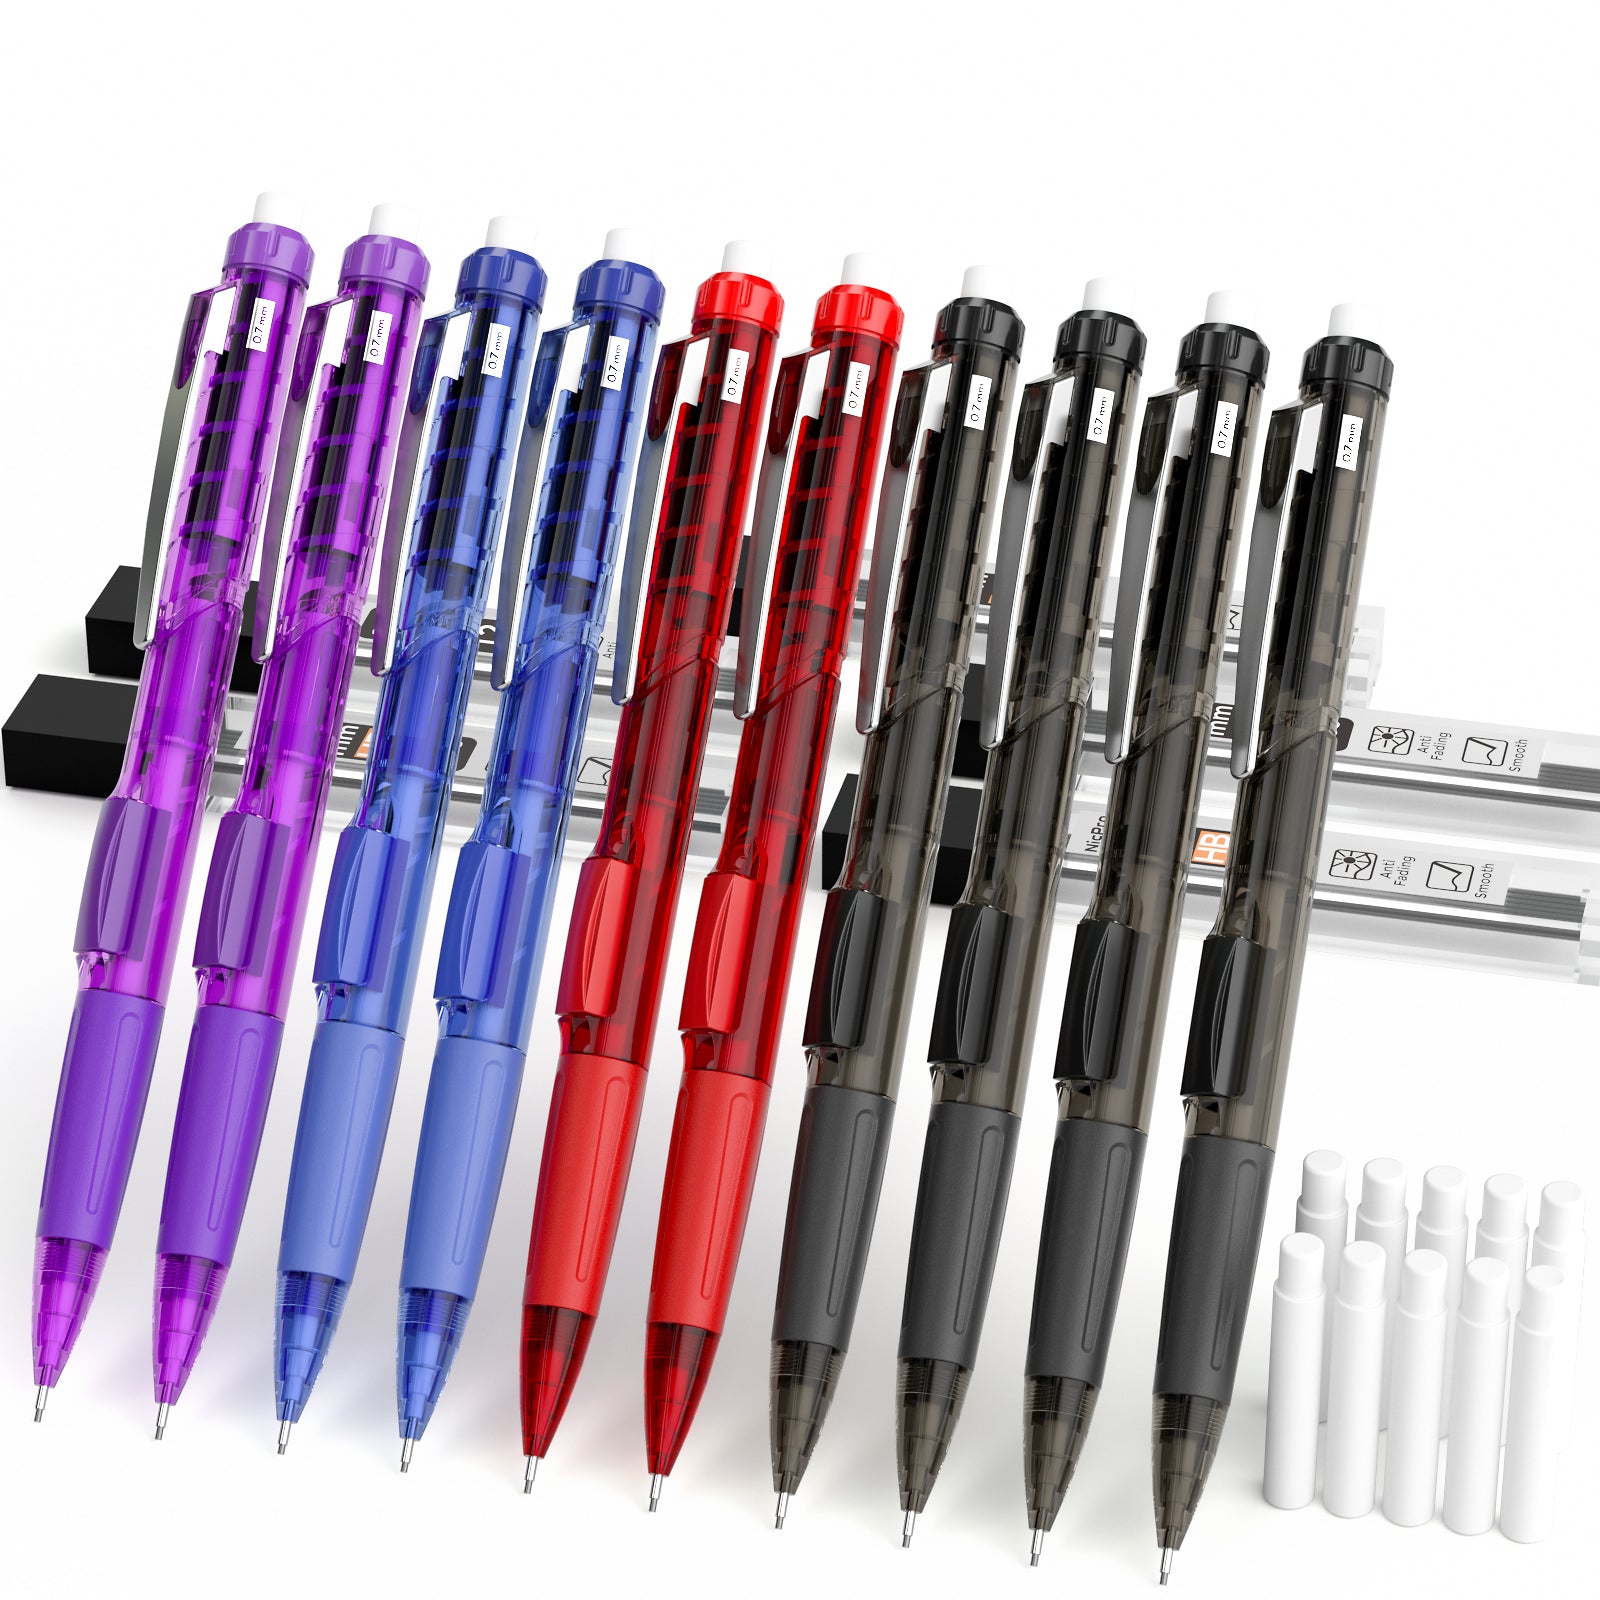 Big Graphite Mechanical Pencil With Refills and Erasers